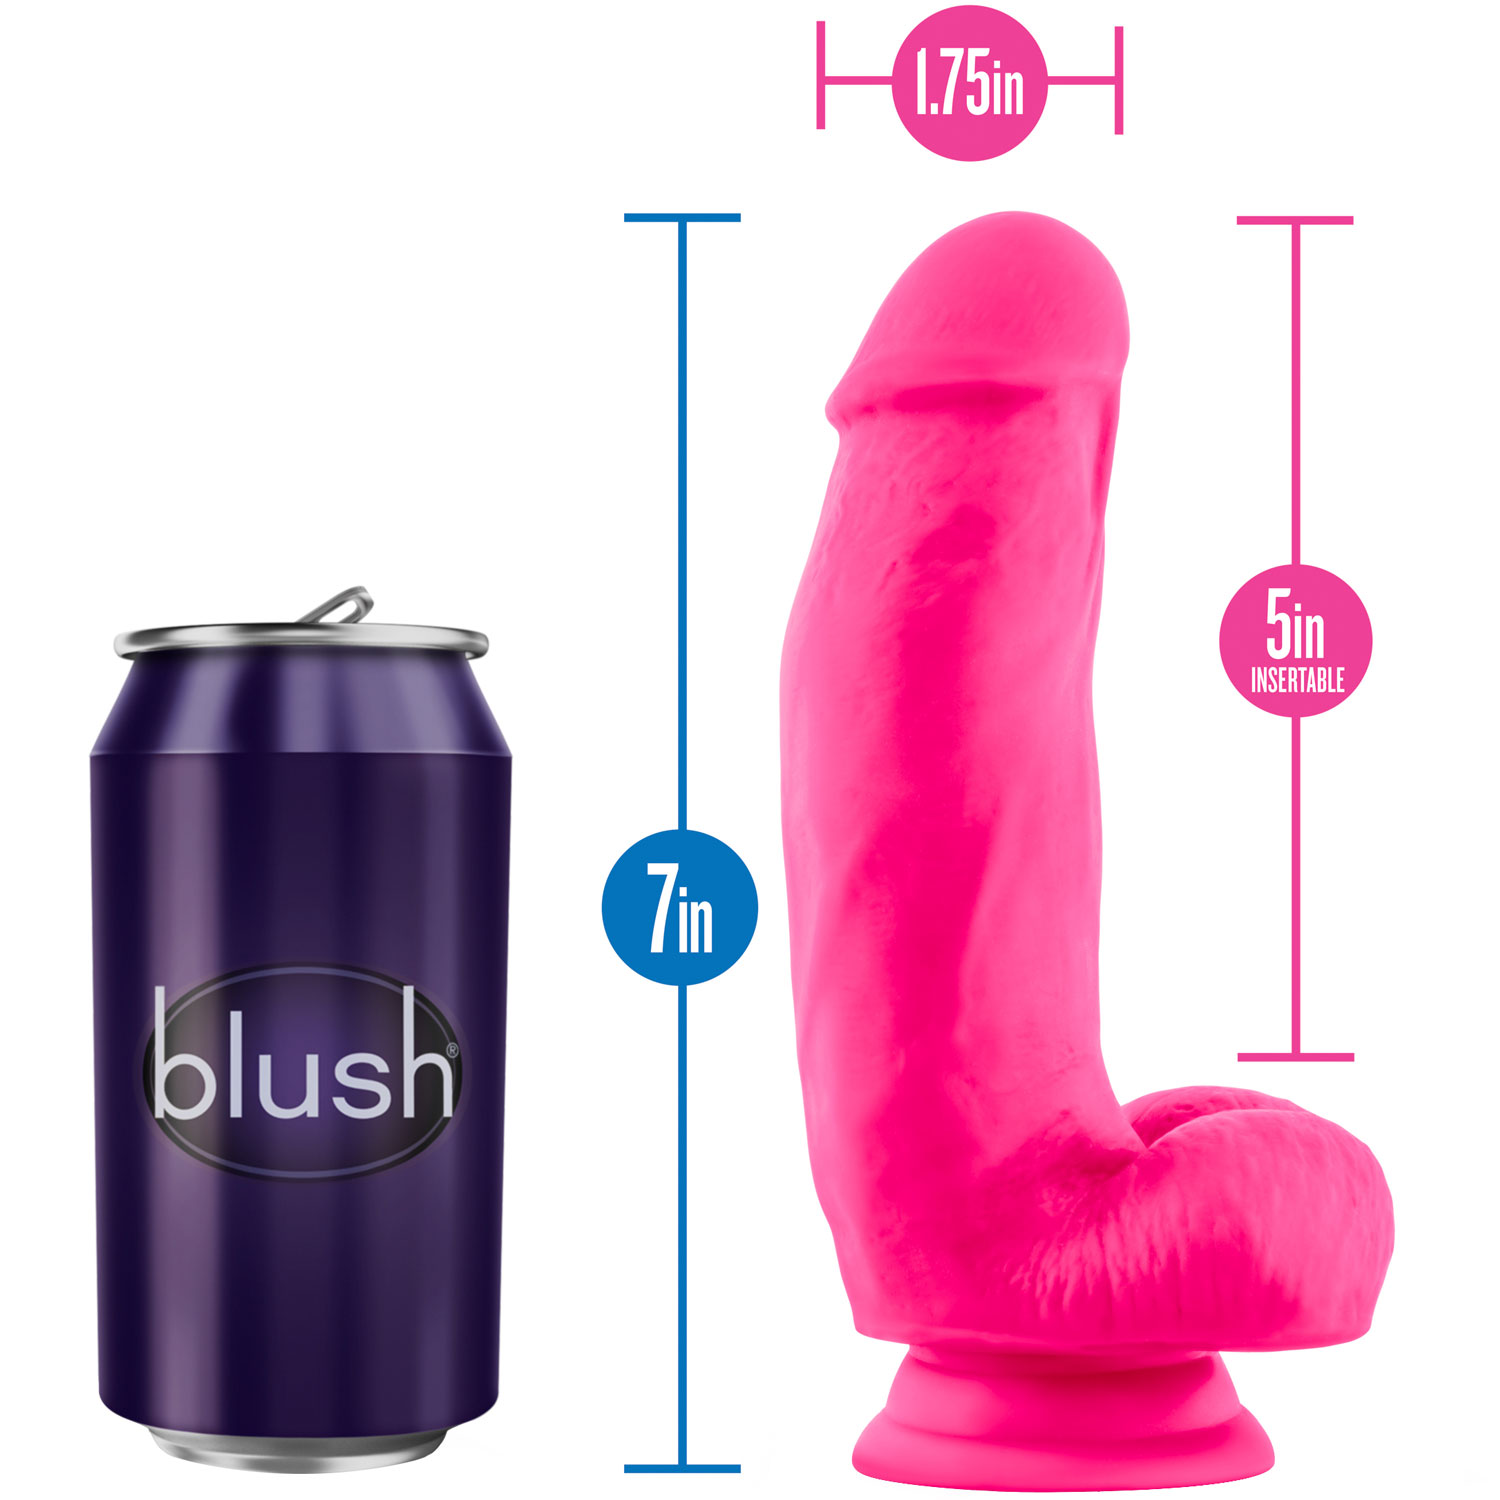 Neo Elite 7 Inch Dual Density Realistic Silicone Dildo With Balls by Blush - Measurements